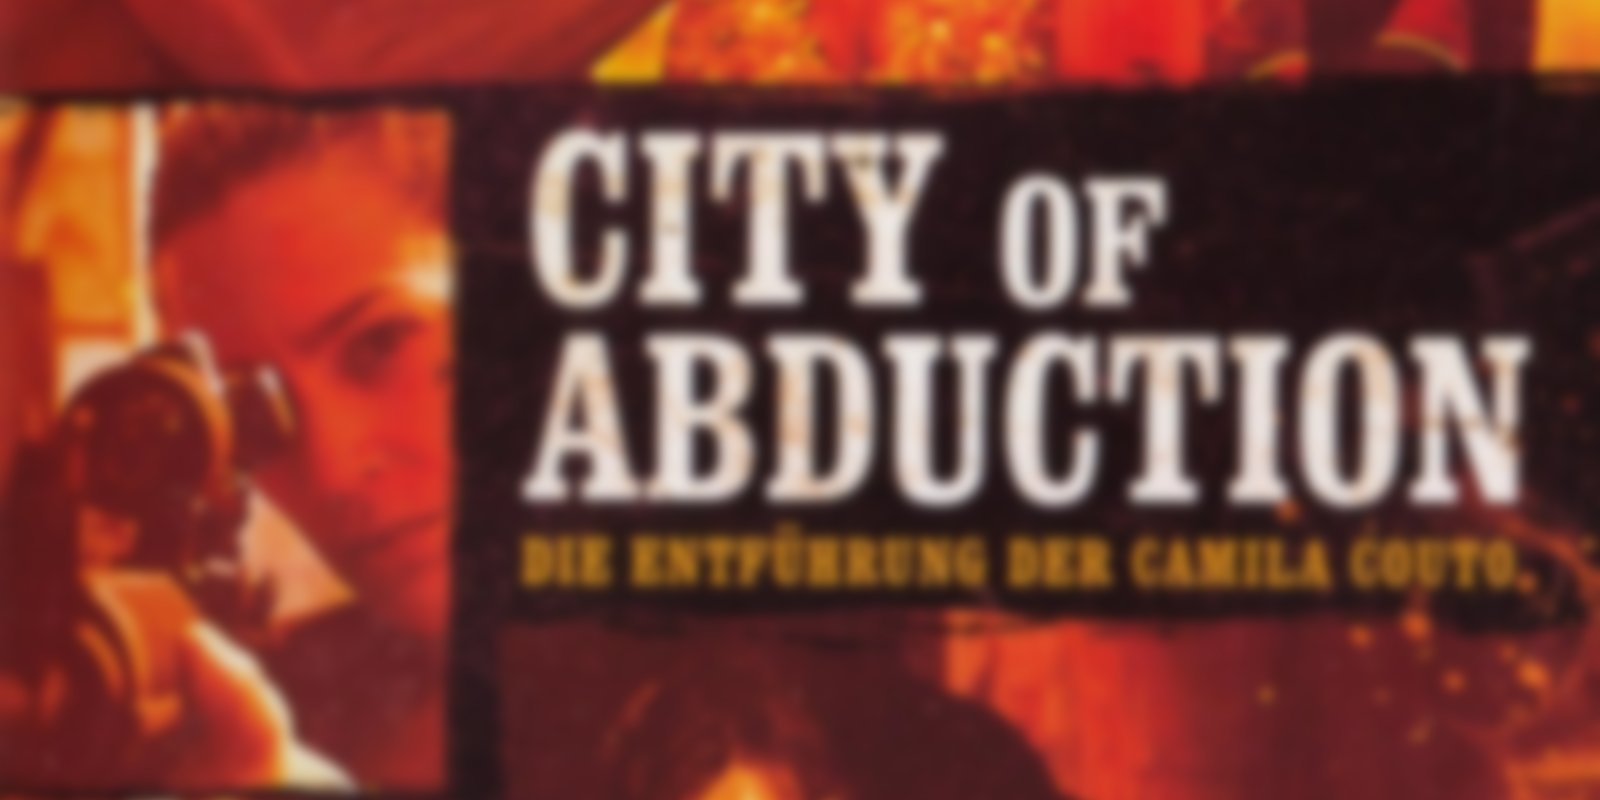 City of Abduction